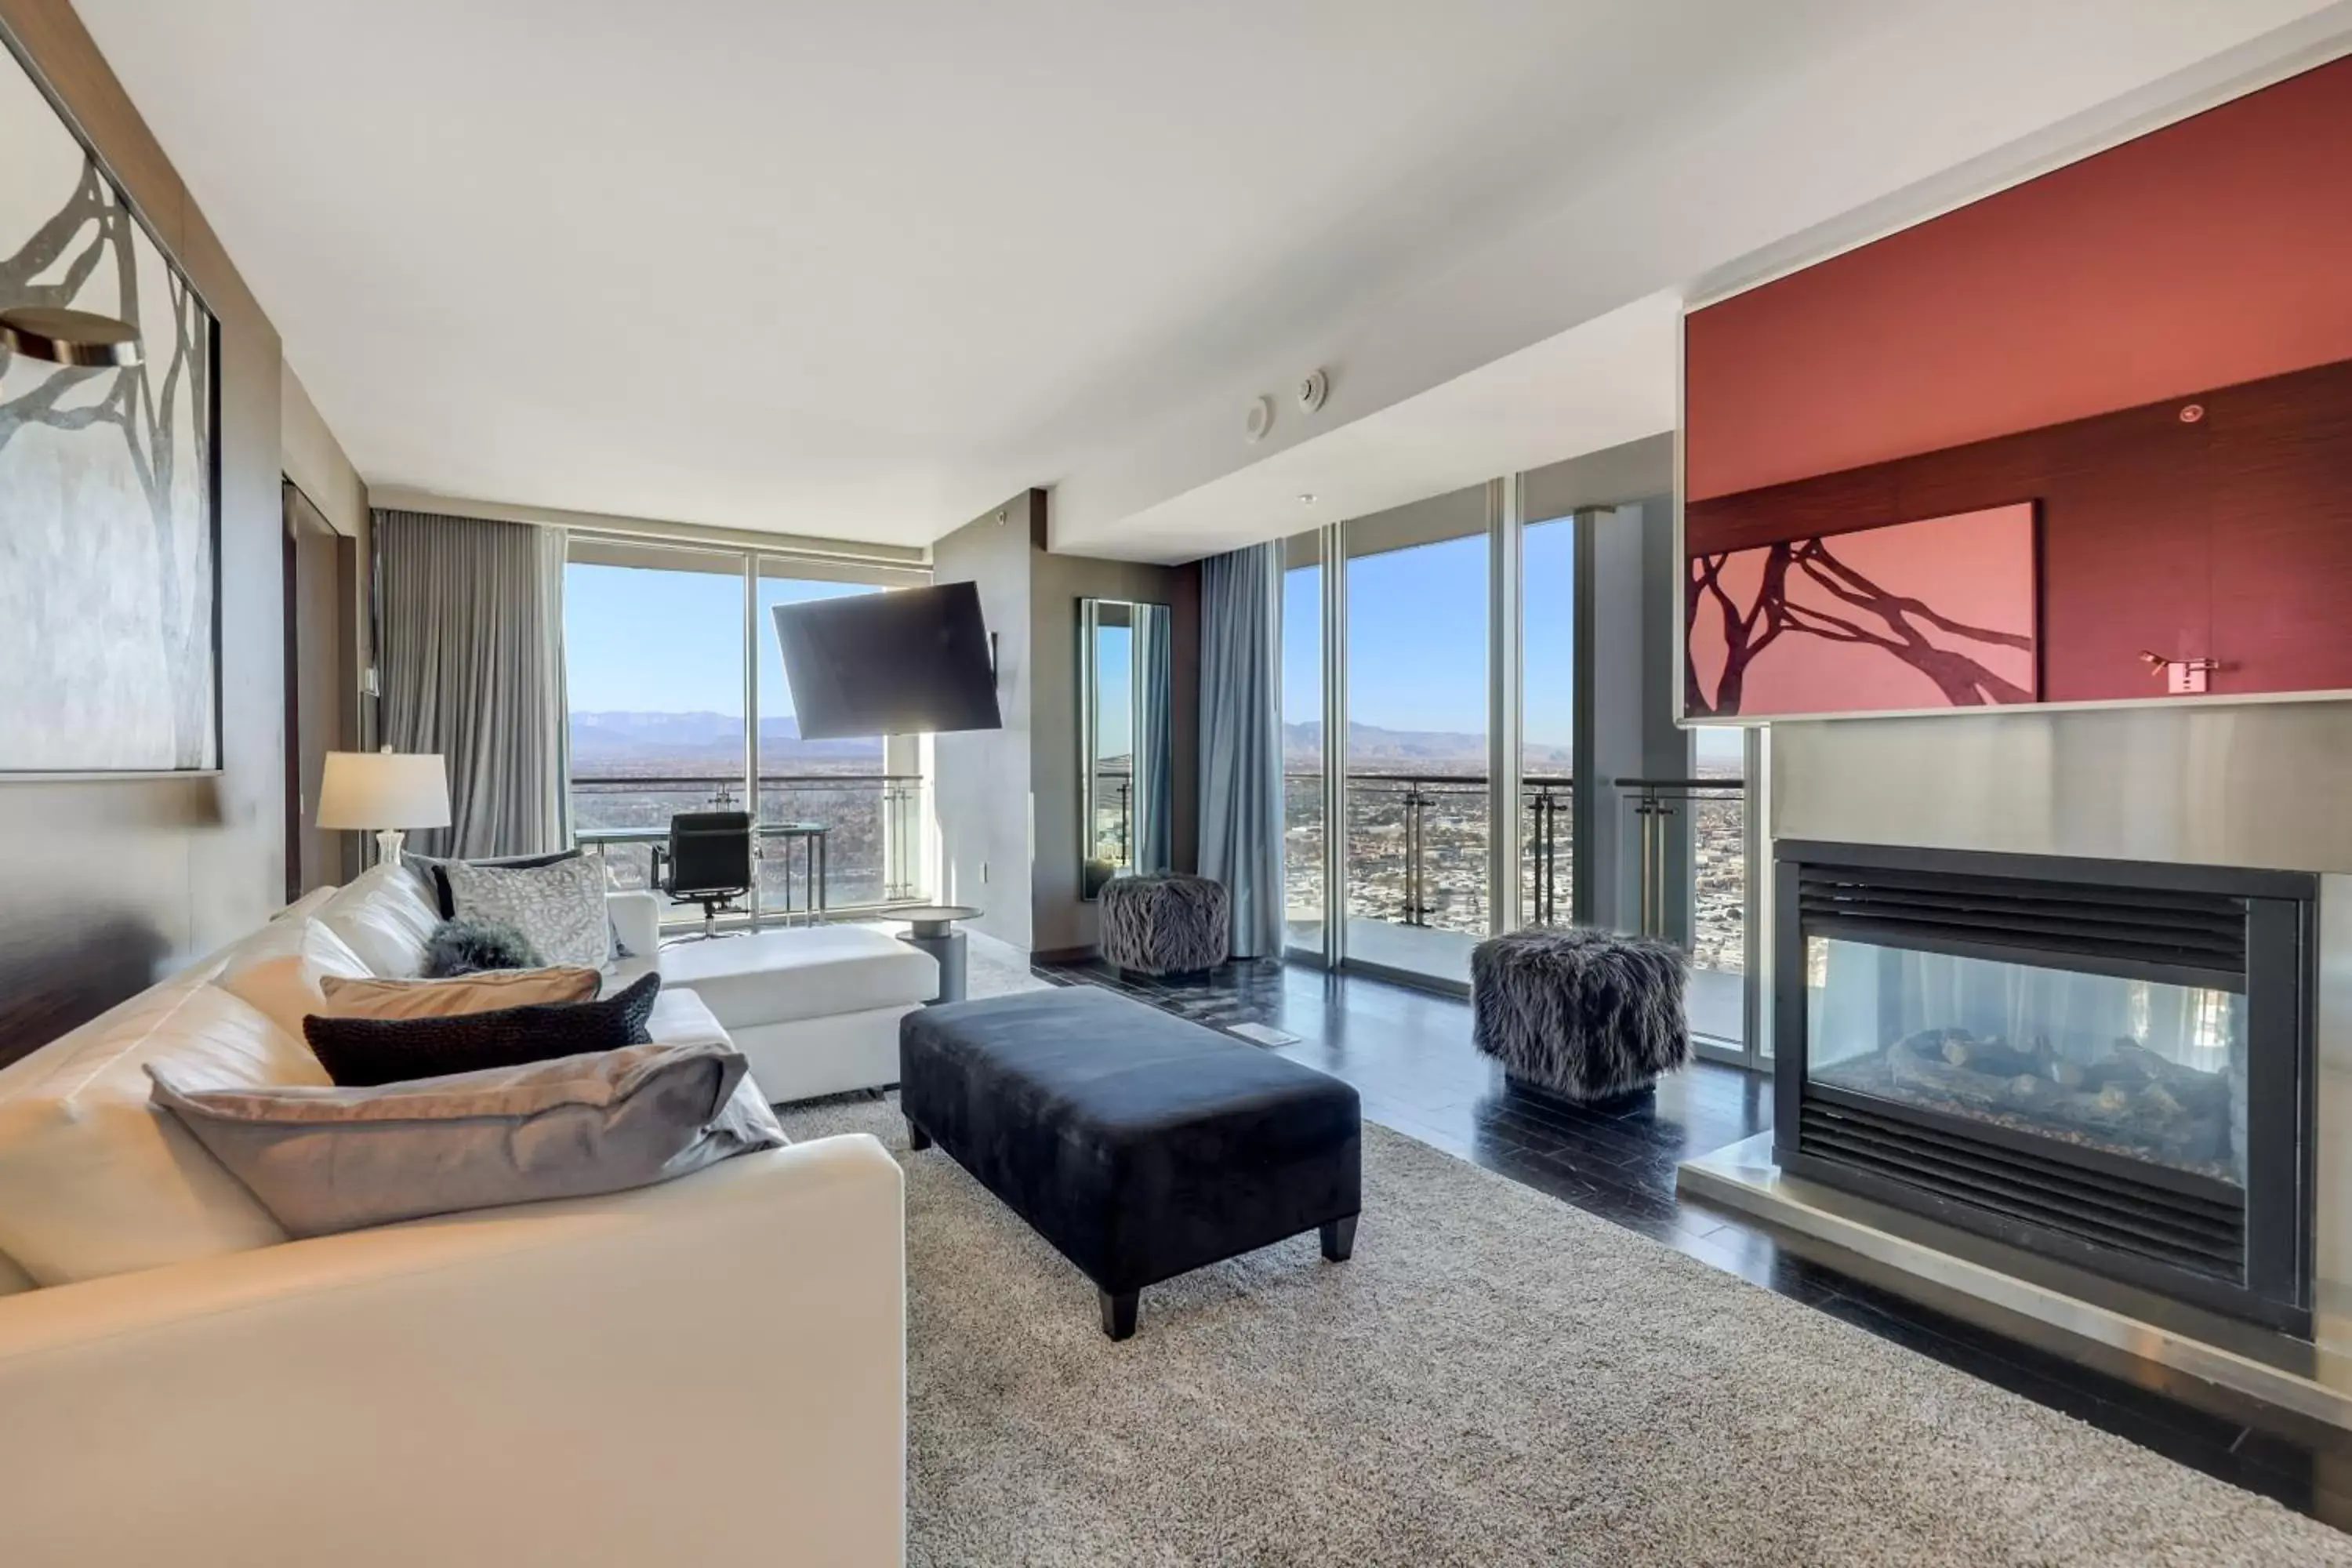 TV and multimedia, Seating Area in Vegas Palms HIGH 52nd fl. 1BDR corner penthouse 1220sqft